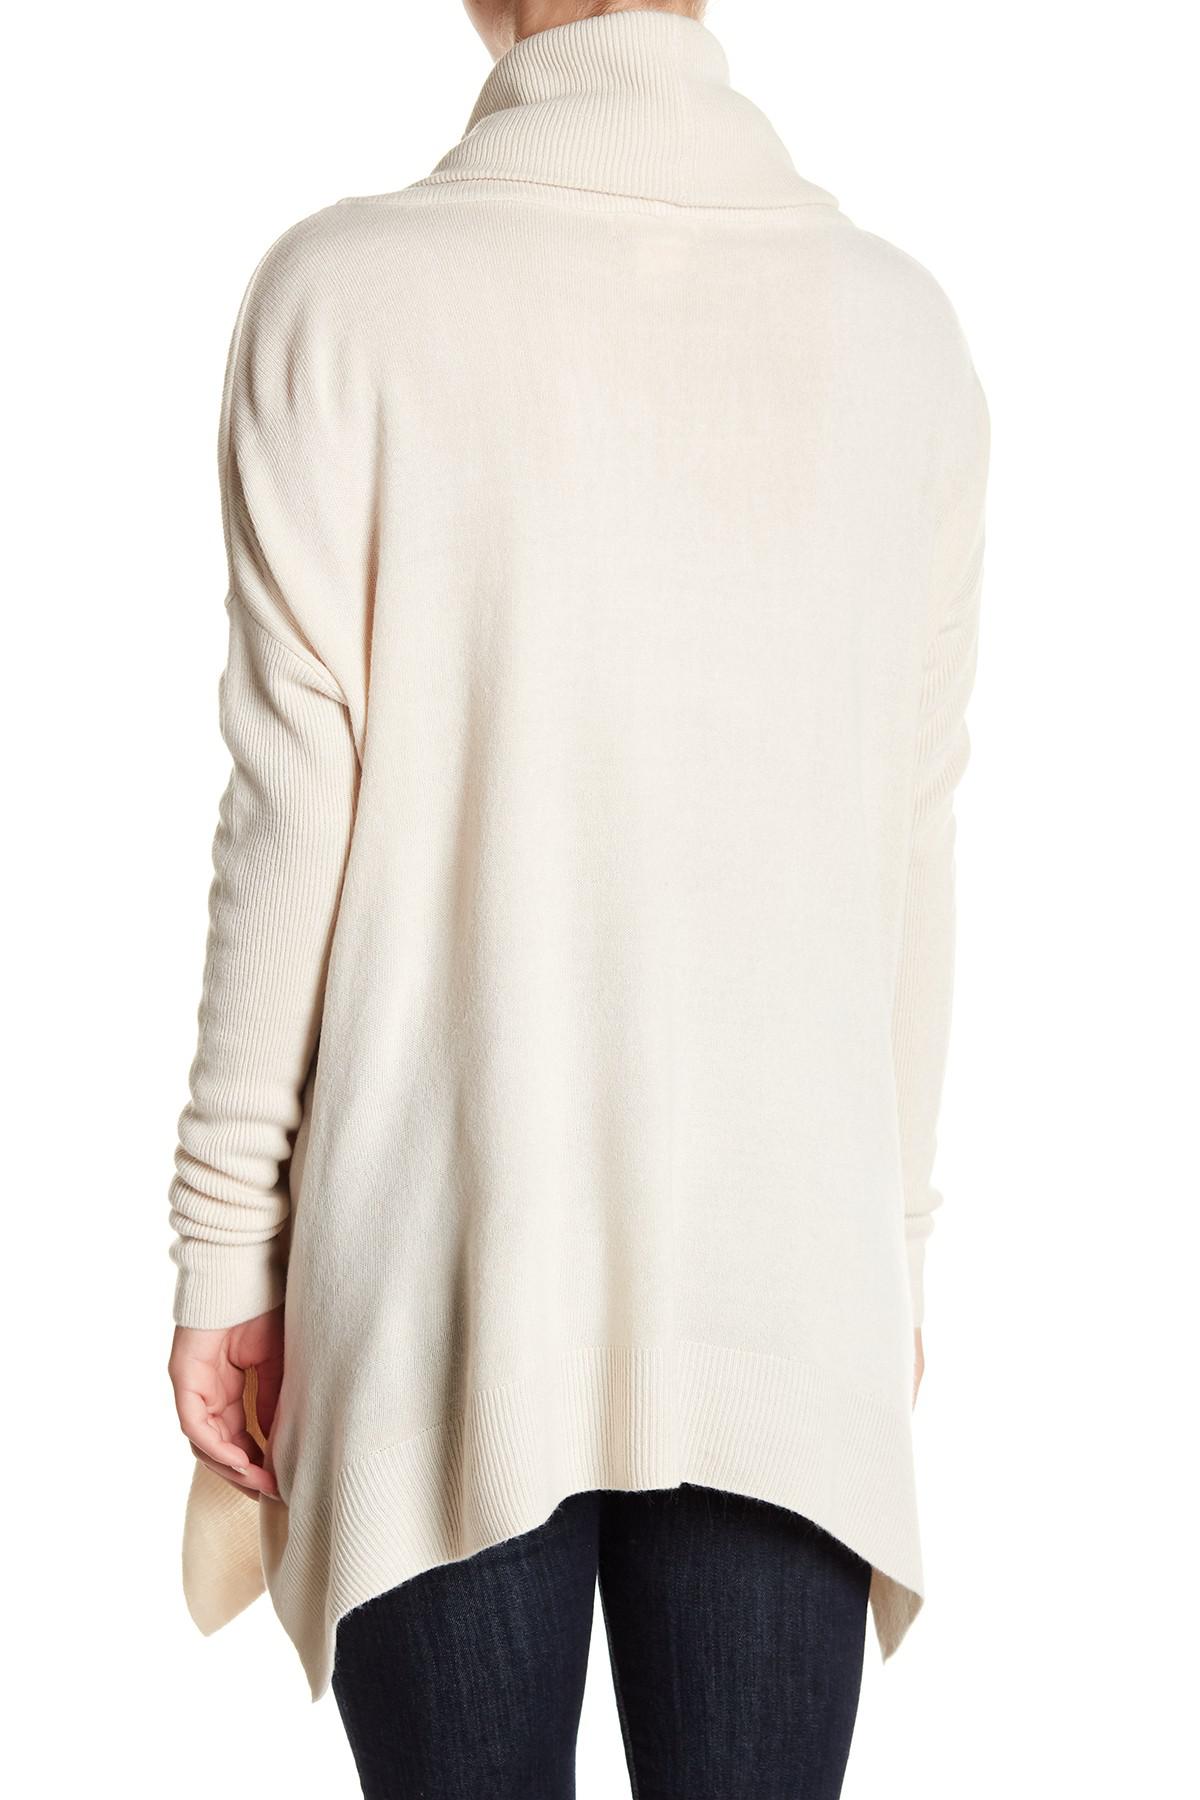 Sweet romeo Cowl Neck Tunic Sweater in Natural | Lyst